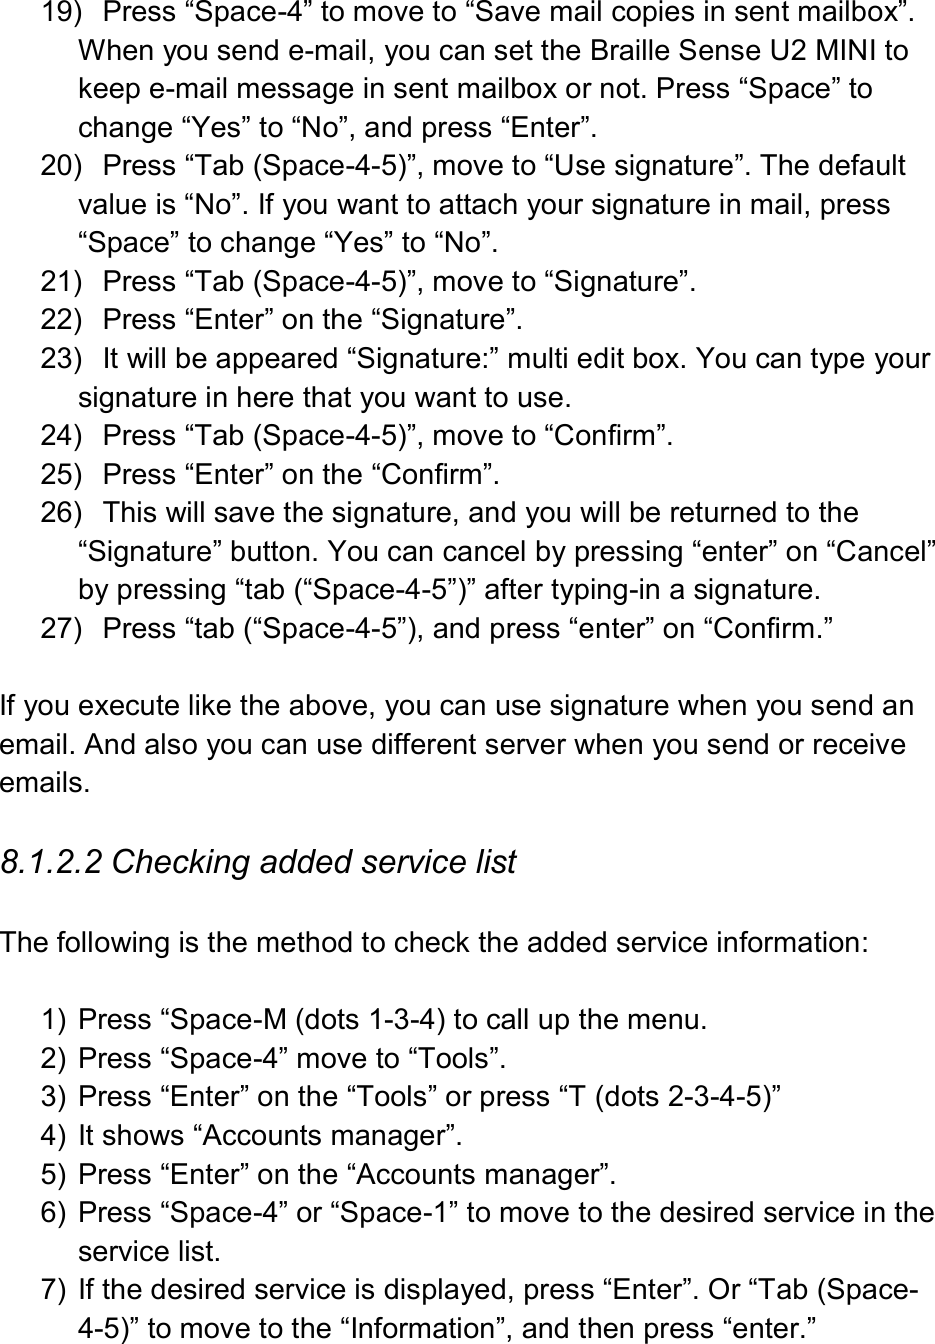  19)  Press “Space-4” to move to “Save mail copies in sent mailbox”. When you send e-mail, you can set the Braille Sense U2 MINI to keep e-mail message in sent mailbox or not. Press “Space” to change “Yes” to “No”, and press “Enter”. 20)  Press “Tab (Space-4-5)”, move to “Use signature”. The default value is “No”. If you want to attach your signature in mail, press “Space” to change “Yes” to “No”. 21)  Press “Tab (Space-4-5)”, move to “Signature”.   22)  Press “Enter” on the “Signature”. 23)  It will be appeared “Signature:” multi edit box. You can type your signature in here that you want to use.   24)  Press “Tab (Space-4-5)”, move to “Confirm”.   25)  Press “Enter” on the “Confirm”. 26)  This will save the signature, and you will be returned to the “Signature” button. You can cancel by pressing “enter” on “Cancel” by pressing “tab (“Space-4-5”)” after typing-in a signature. 27)  Press “tab (“Space-4-5”), and press “enter” on “Confirm.”  If you execute like the above, you can use signature when you send an email. And also you can use different server when you send or receive emails.  8.1.2.2 Checking added service list  The following is the method to check the added service information:  1)  Press “Space-M (dots 1-3-4) to call up the menu. 2)  Press “Space-4” move to “Tools”. 3)  Press “Enter” on the “Tools” or press “T (dots 2-3-4-5)” 4)  It shows “Accounts manager”. 5)  Press “Enter” on the “Accounts manager”. 6)  Press “Space-4” or “Space-1” to move to the desired service in the service list. 7)  If the desired service is displayed, press “Enter”. Or “Tab (Space-4-5)” to move to the “Information”, and then press “enter.” 